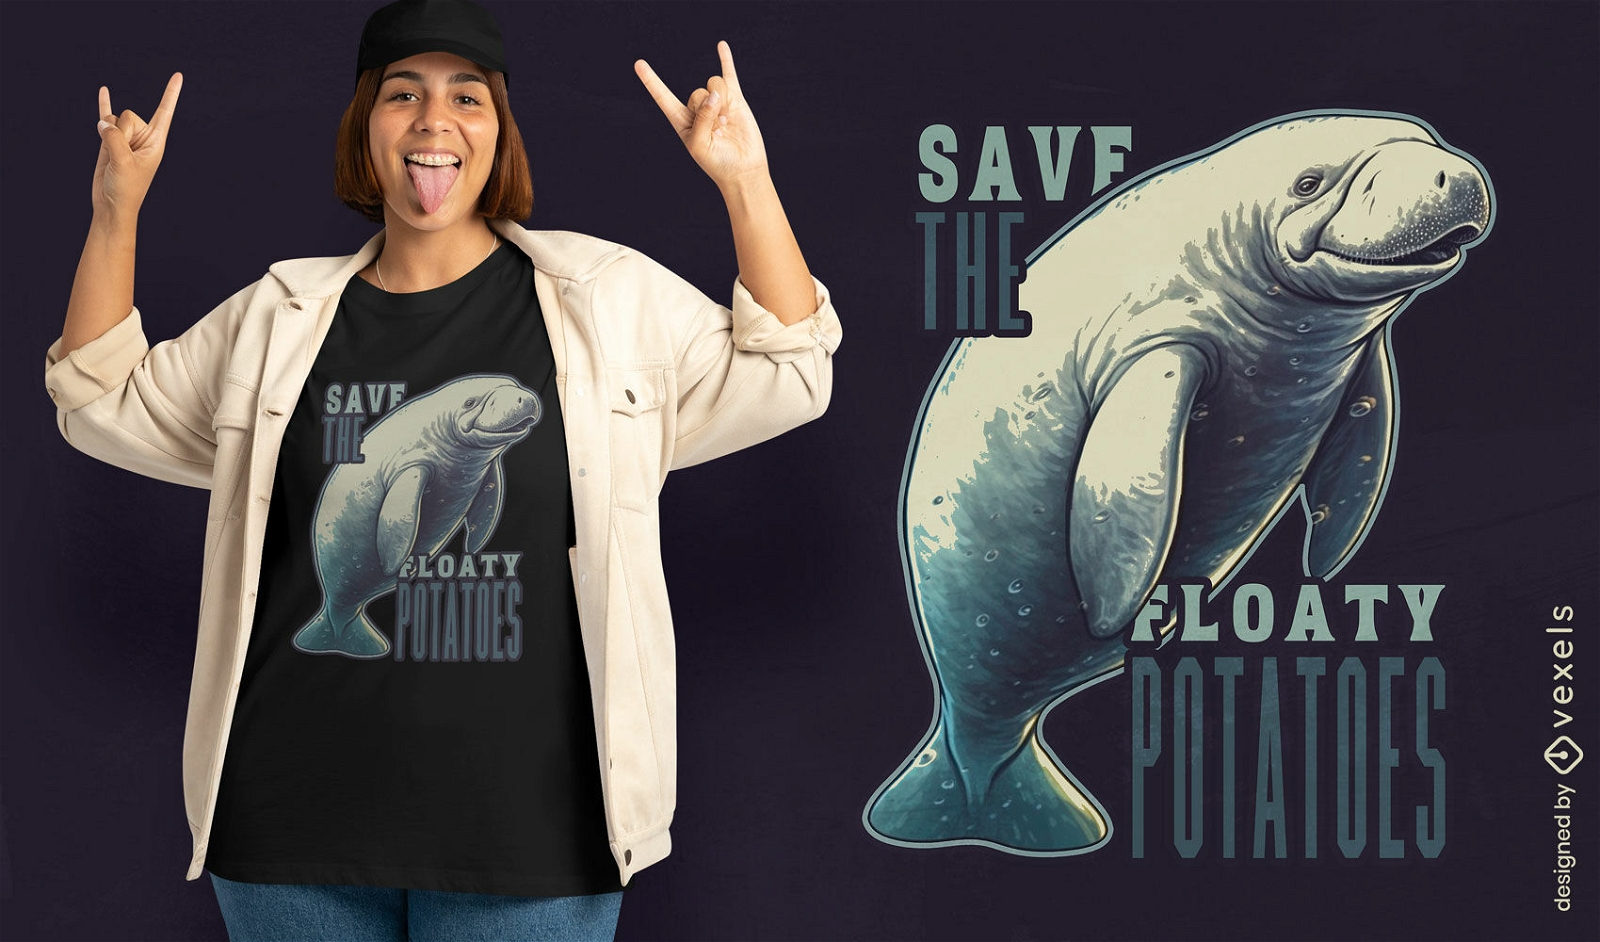 Save the manatees conservation t-shirt design